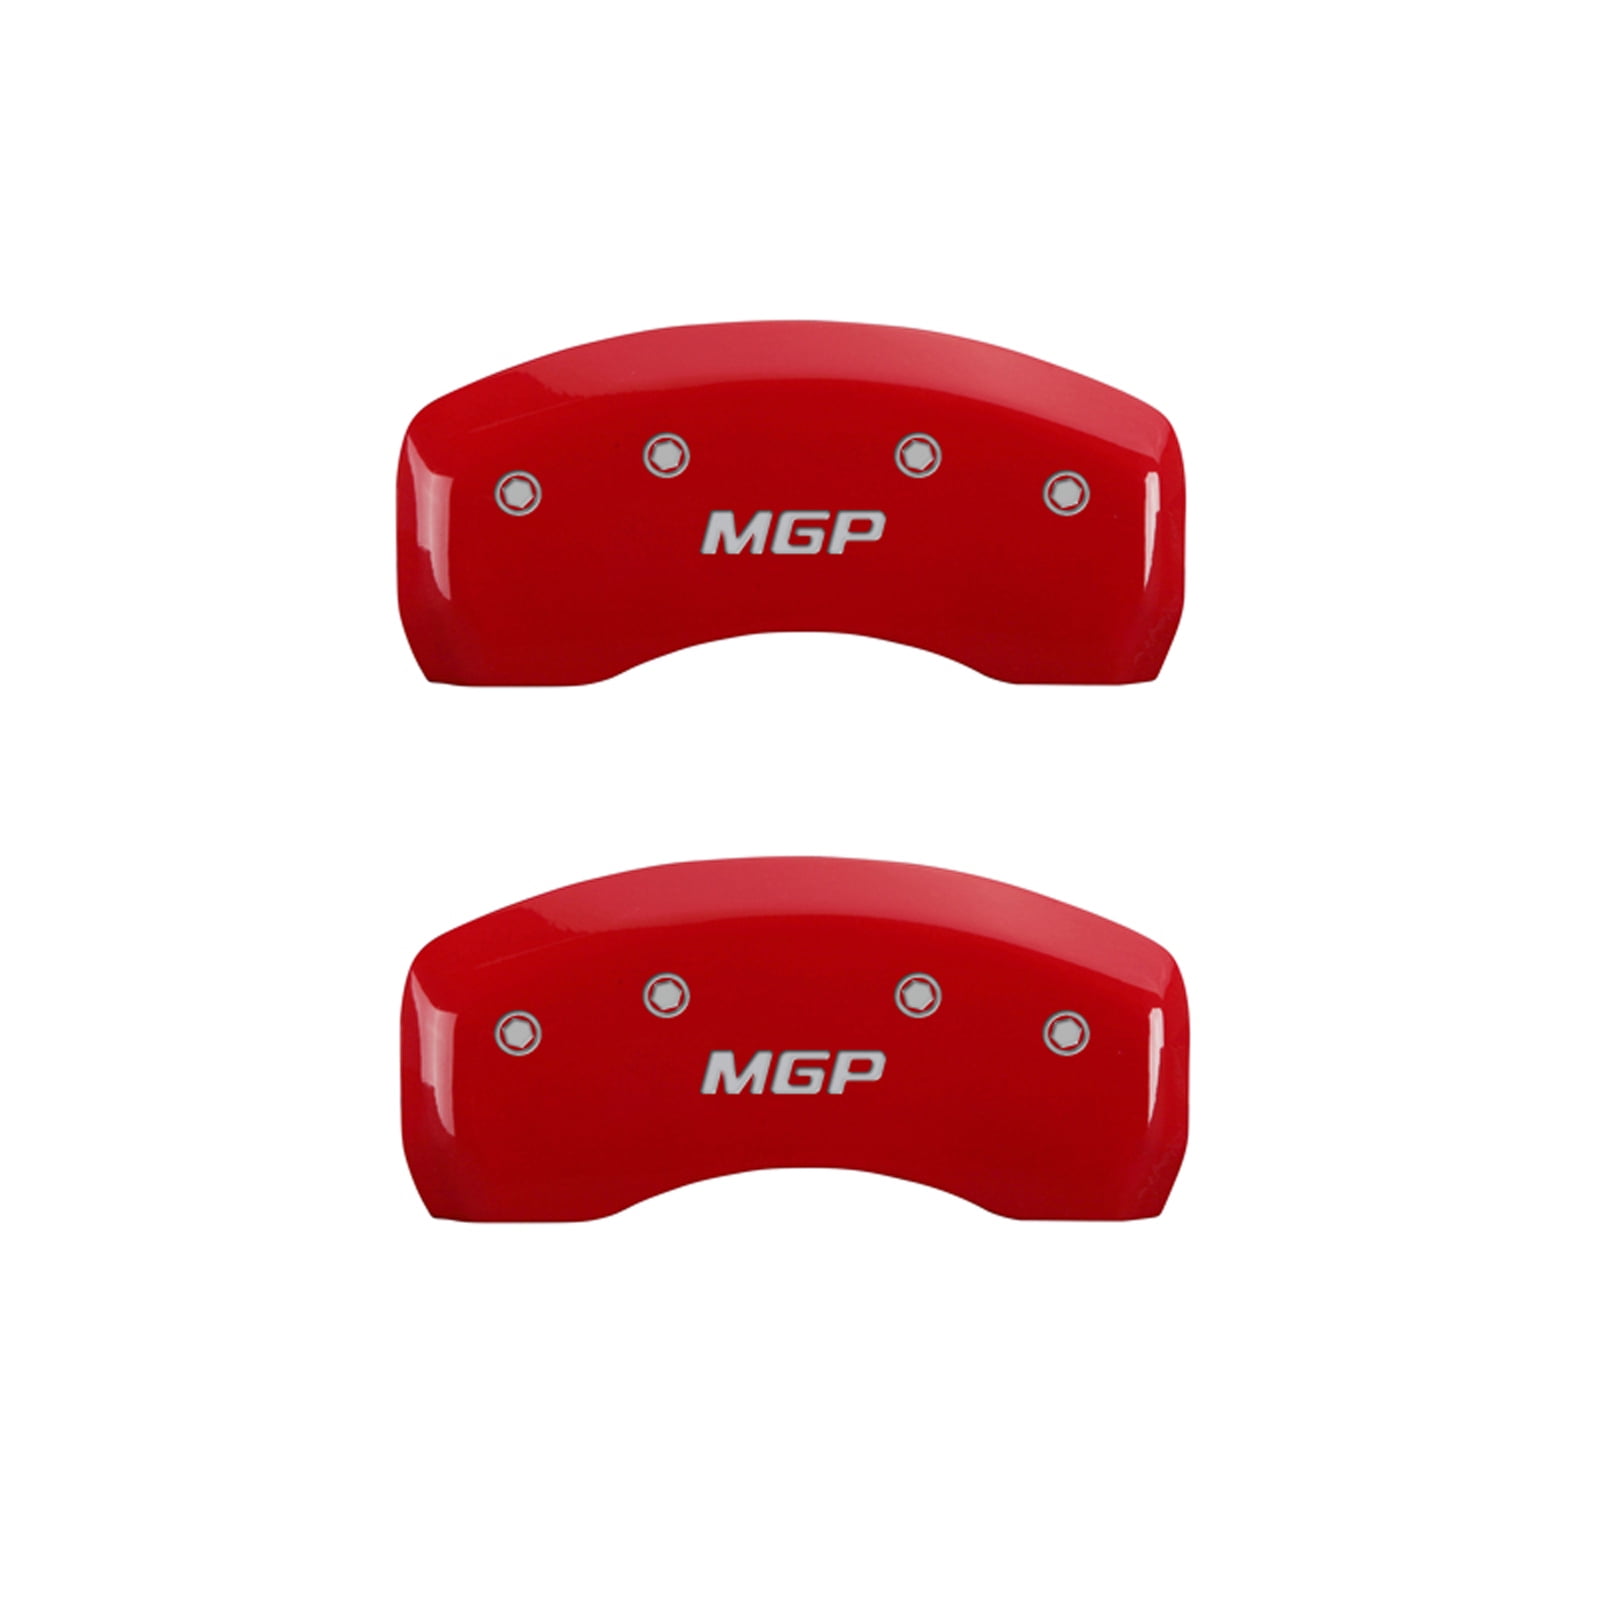 MGP Caliper Covers 10204SMGPRD Red Powder Coat Finish MGP Engraved Caliper Cover with Silver Characters, Set of 4 